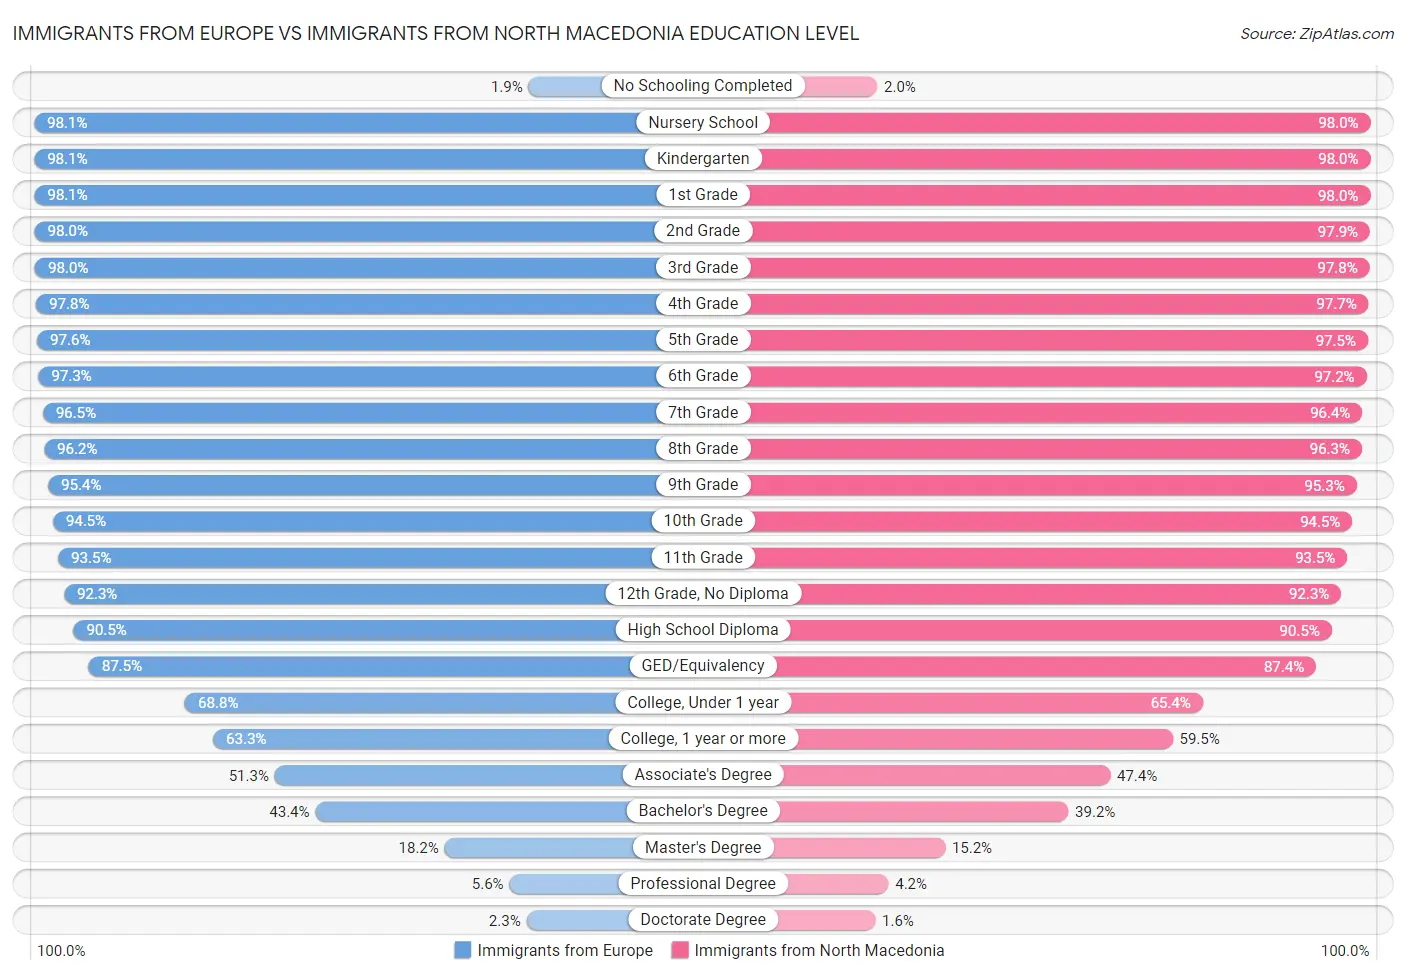 Immigrants from Europe vs Immigrants from North Macedonia Education Level